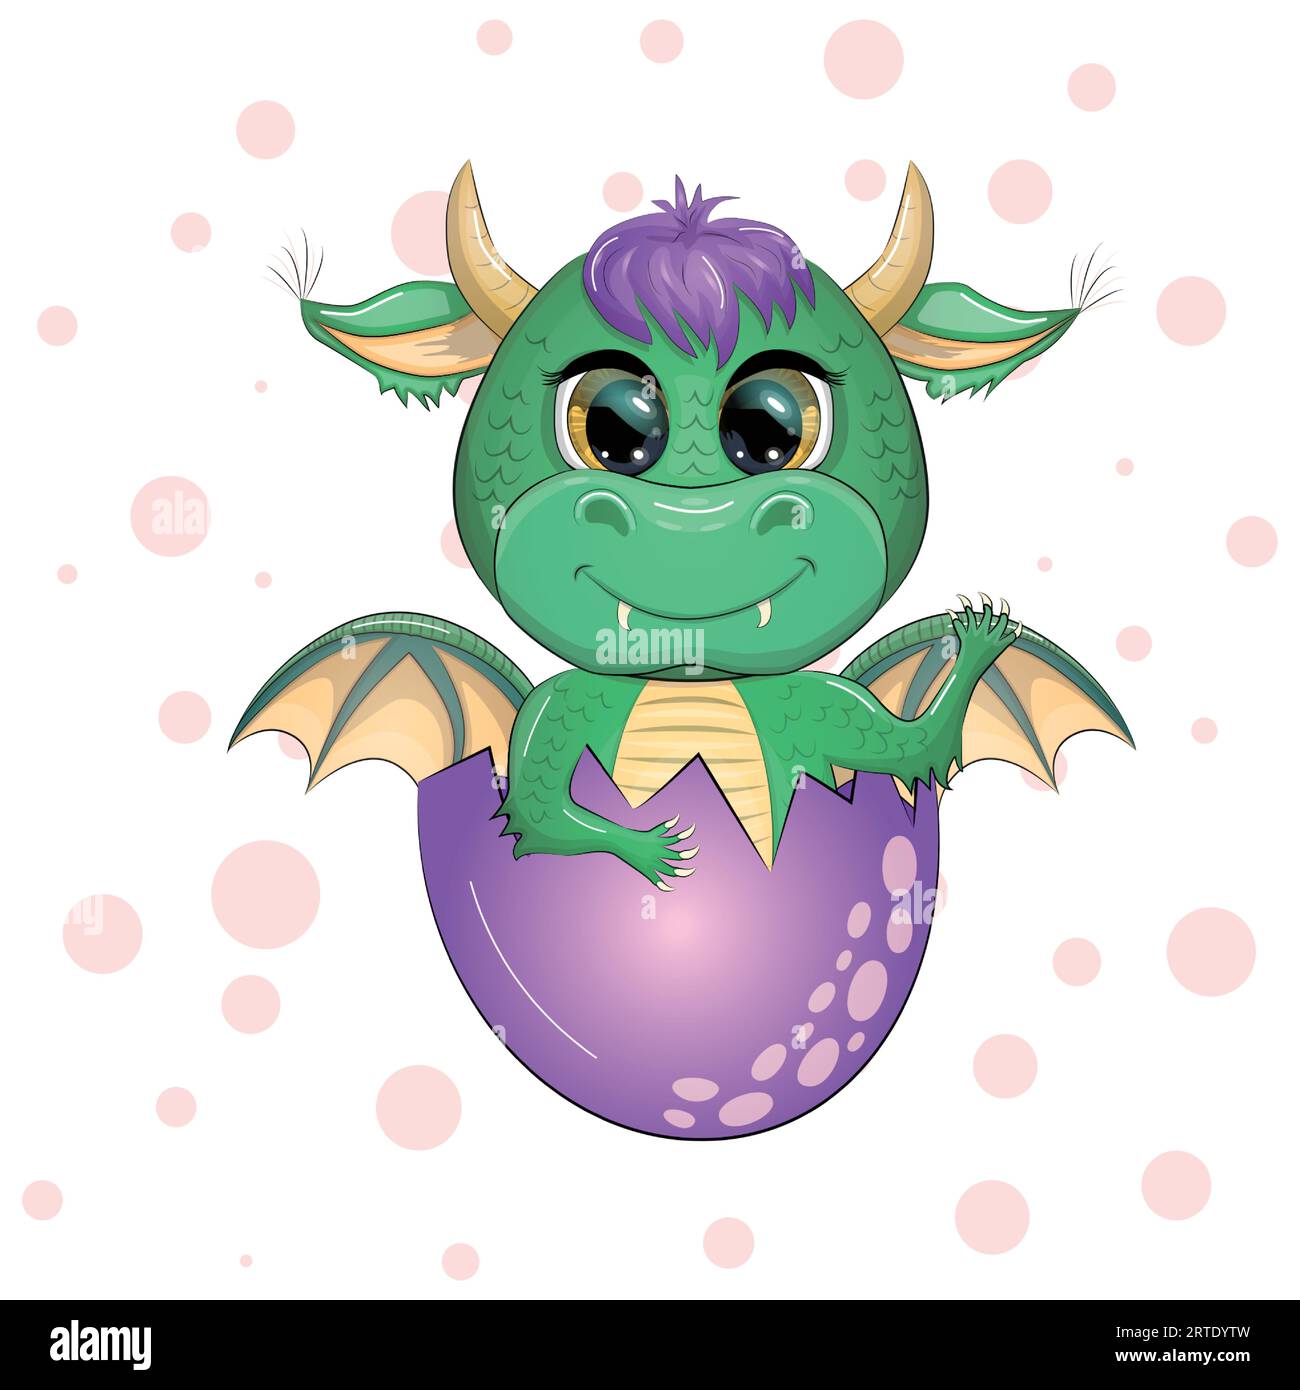 Cute cartoon green baby dragon with horns and wings. Symbol of 2024 according to the Chinese calendar. Funny mythical monster reptile. Stock Vector